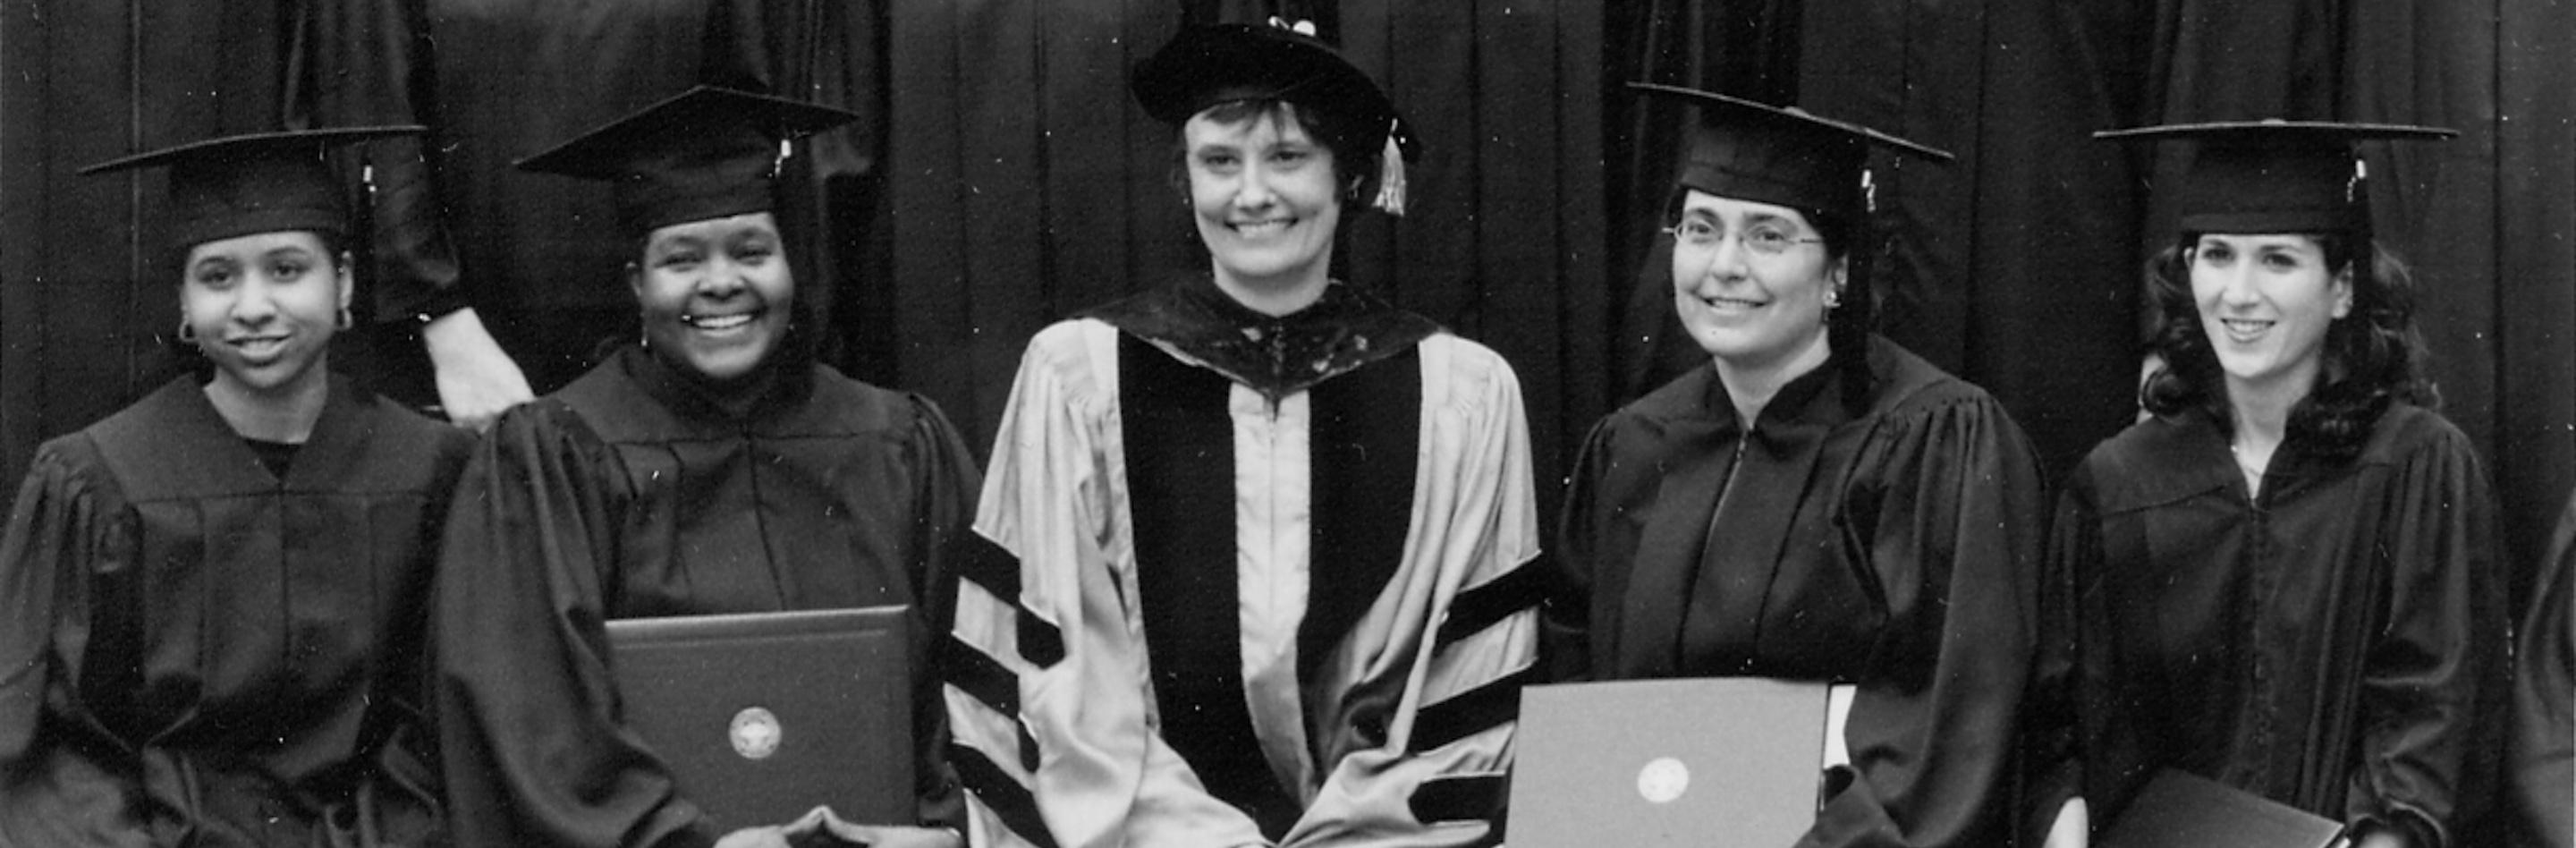 A black and white photo of a row of graduates